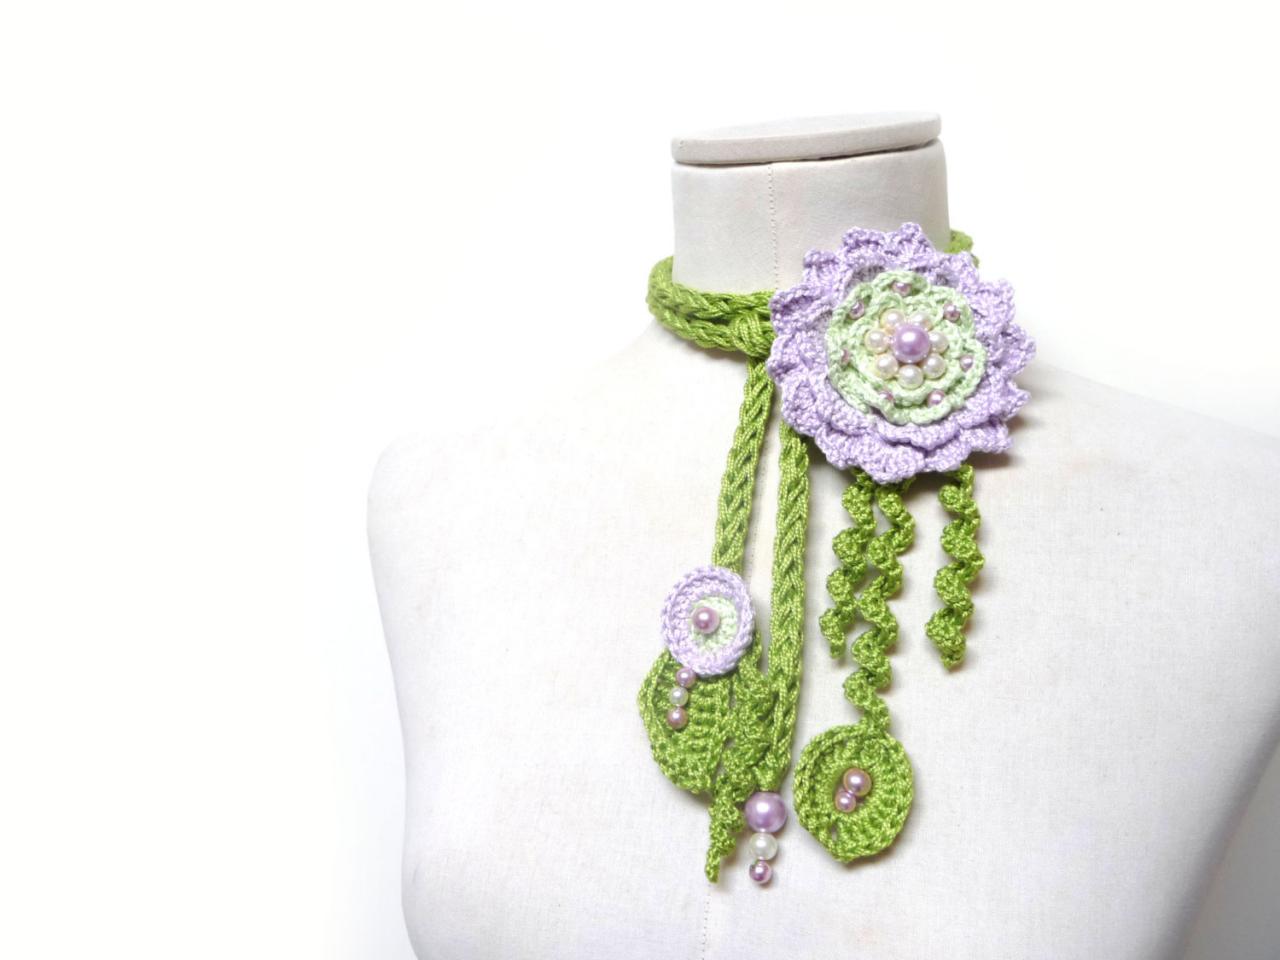 Crochet Cotton Lariat Necklace - Lime Green Leaves And Lilac Flower With Glass Pearls - Little Peony